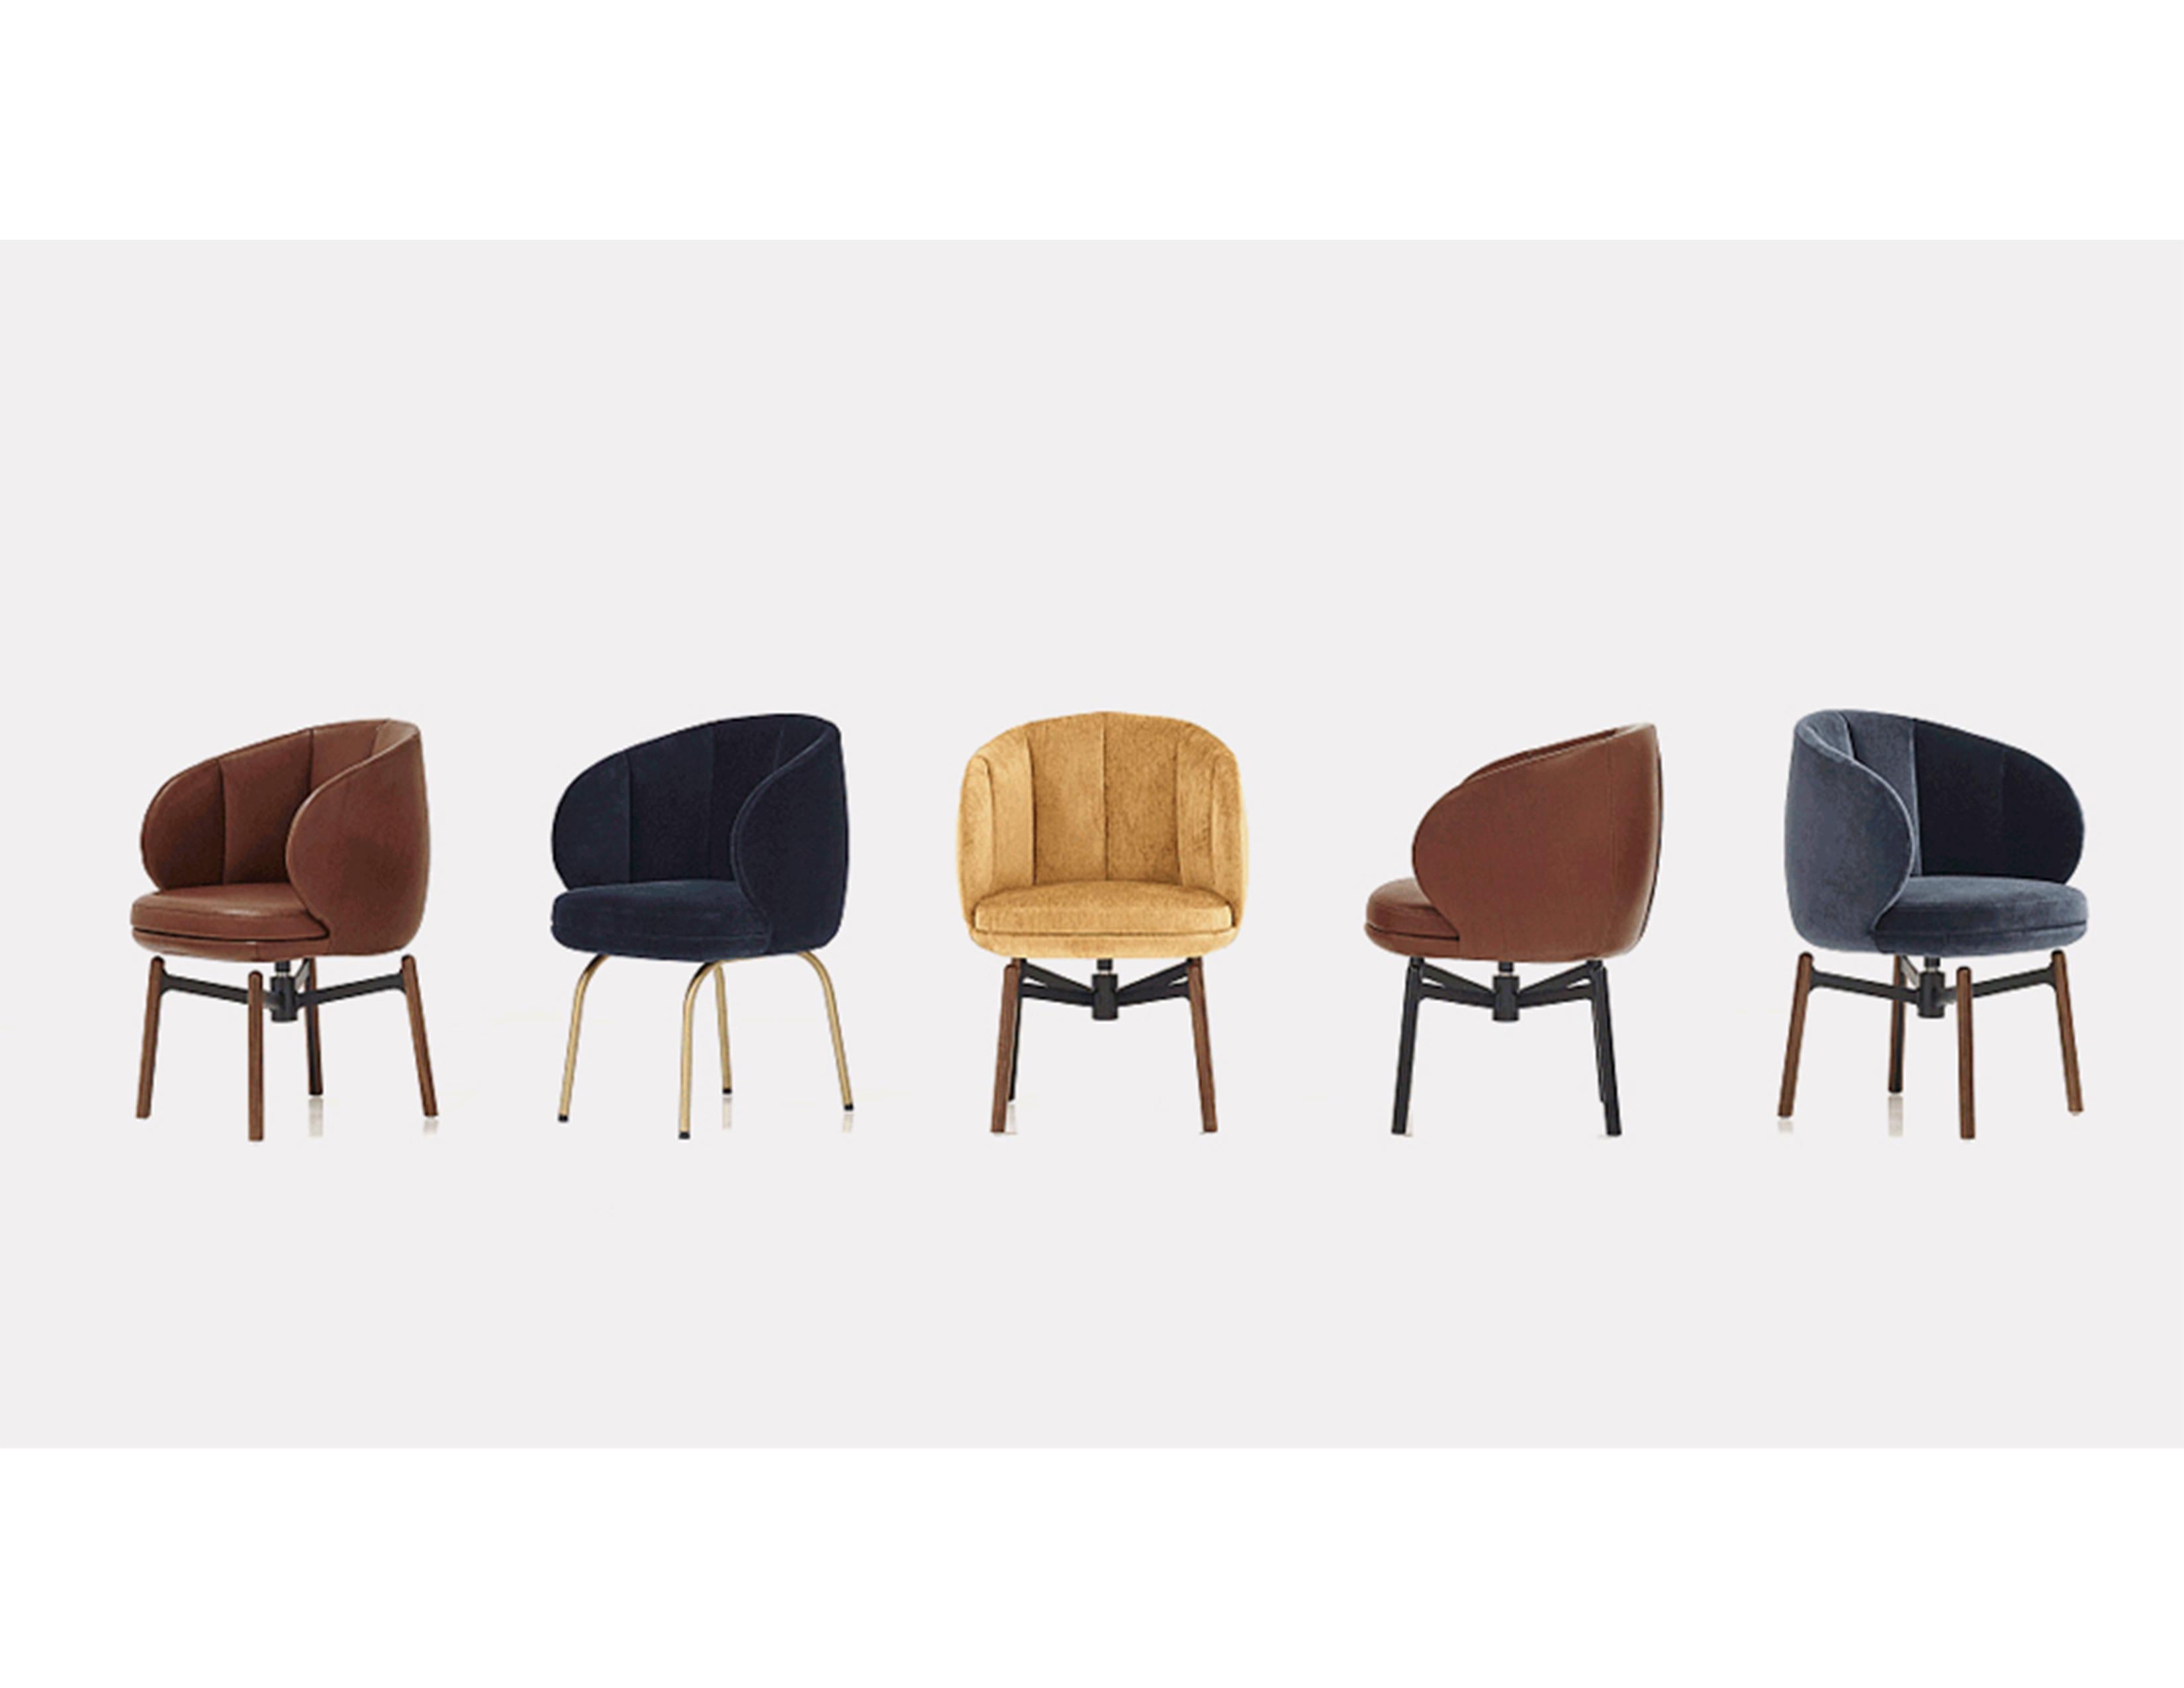 Vuelta FD swivel
Setting design, comfort and independence of form atop four legs to create an upholstered chair that unites function and aesthetics, is the height of artistic design. In Vuelta, Jaime Hayon has created an unmistakable look, brought